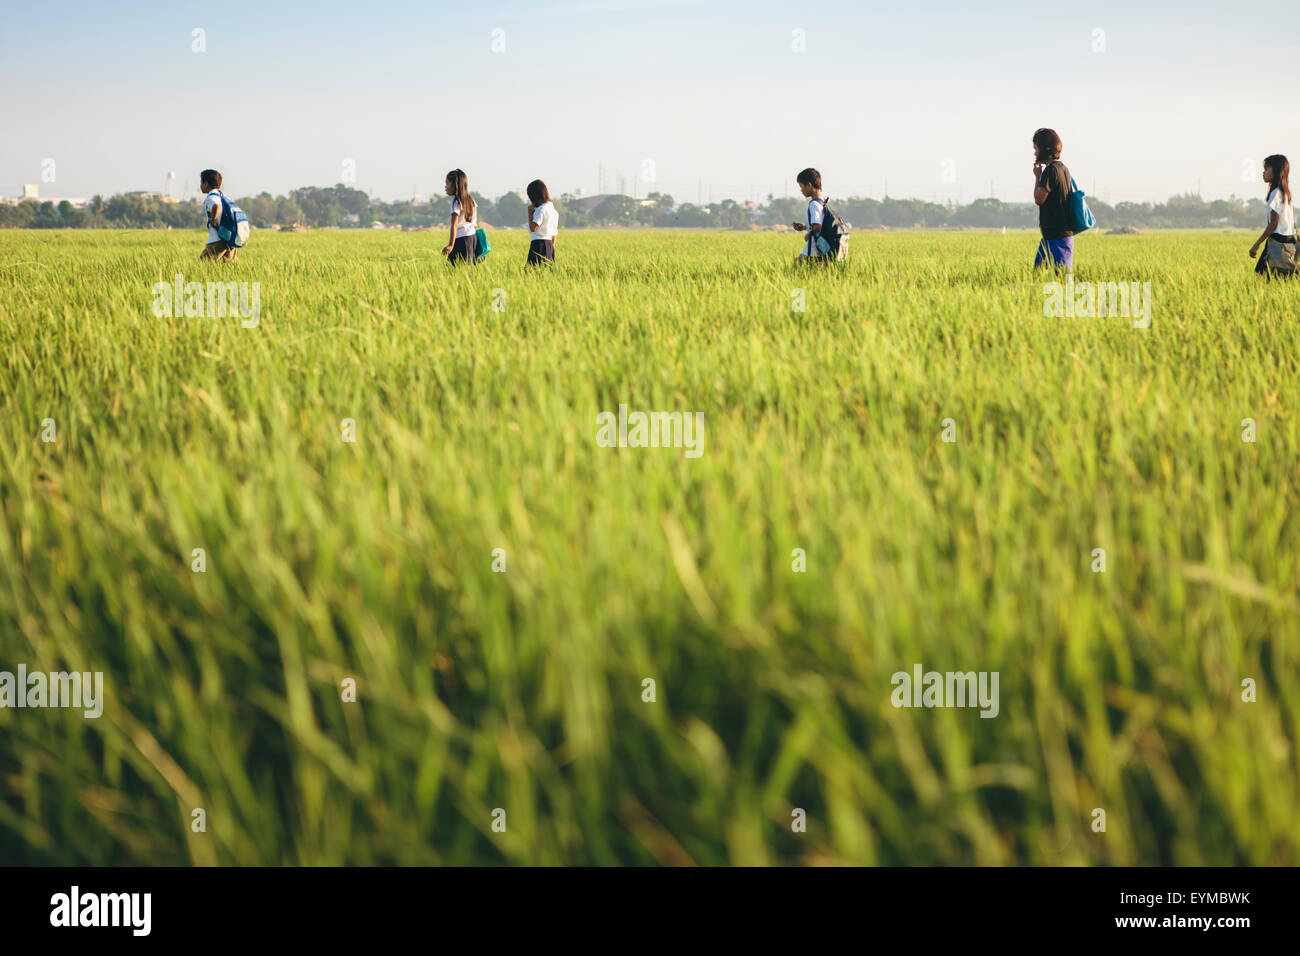 Group of Asian School Children Walking Through Rural Rice Fields to go to School in the Morning Stock Photo